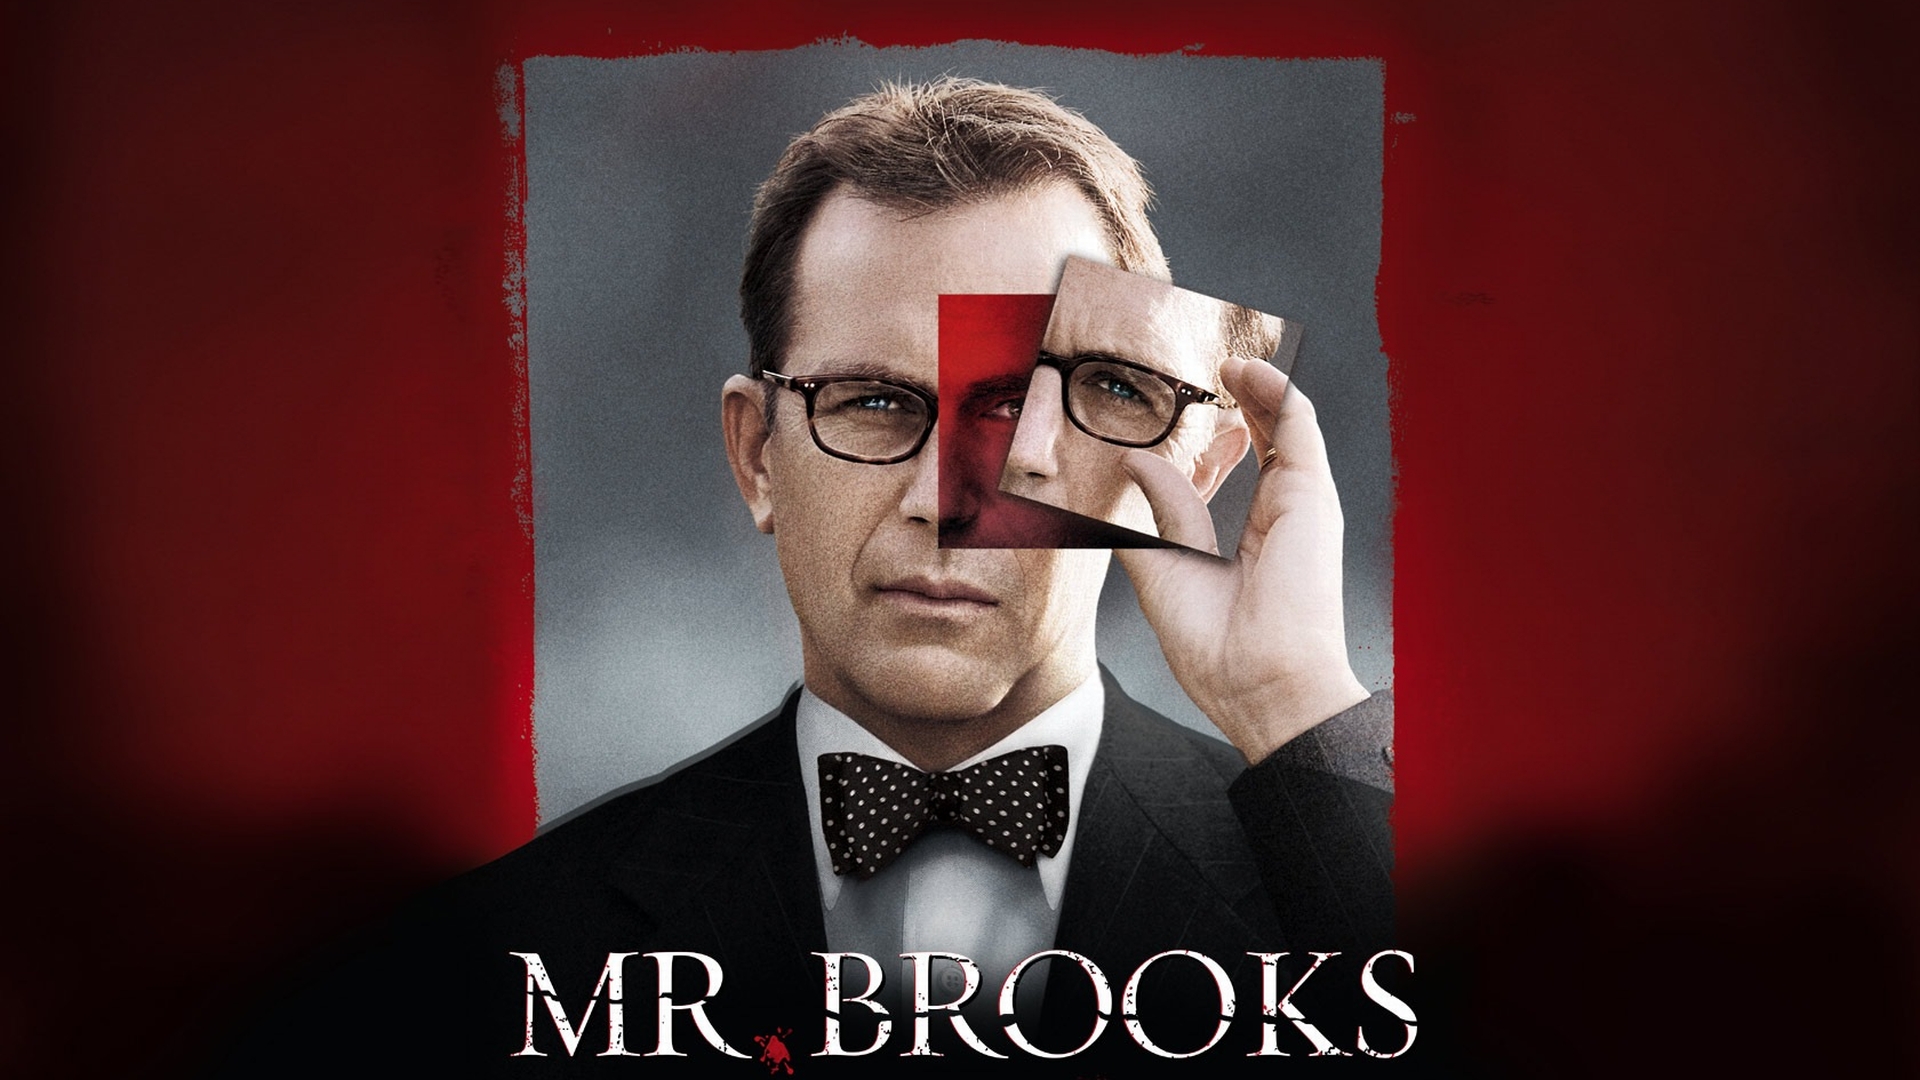 Mr. Brooks movie poster featuring Kevin Costner